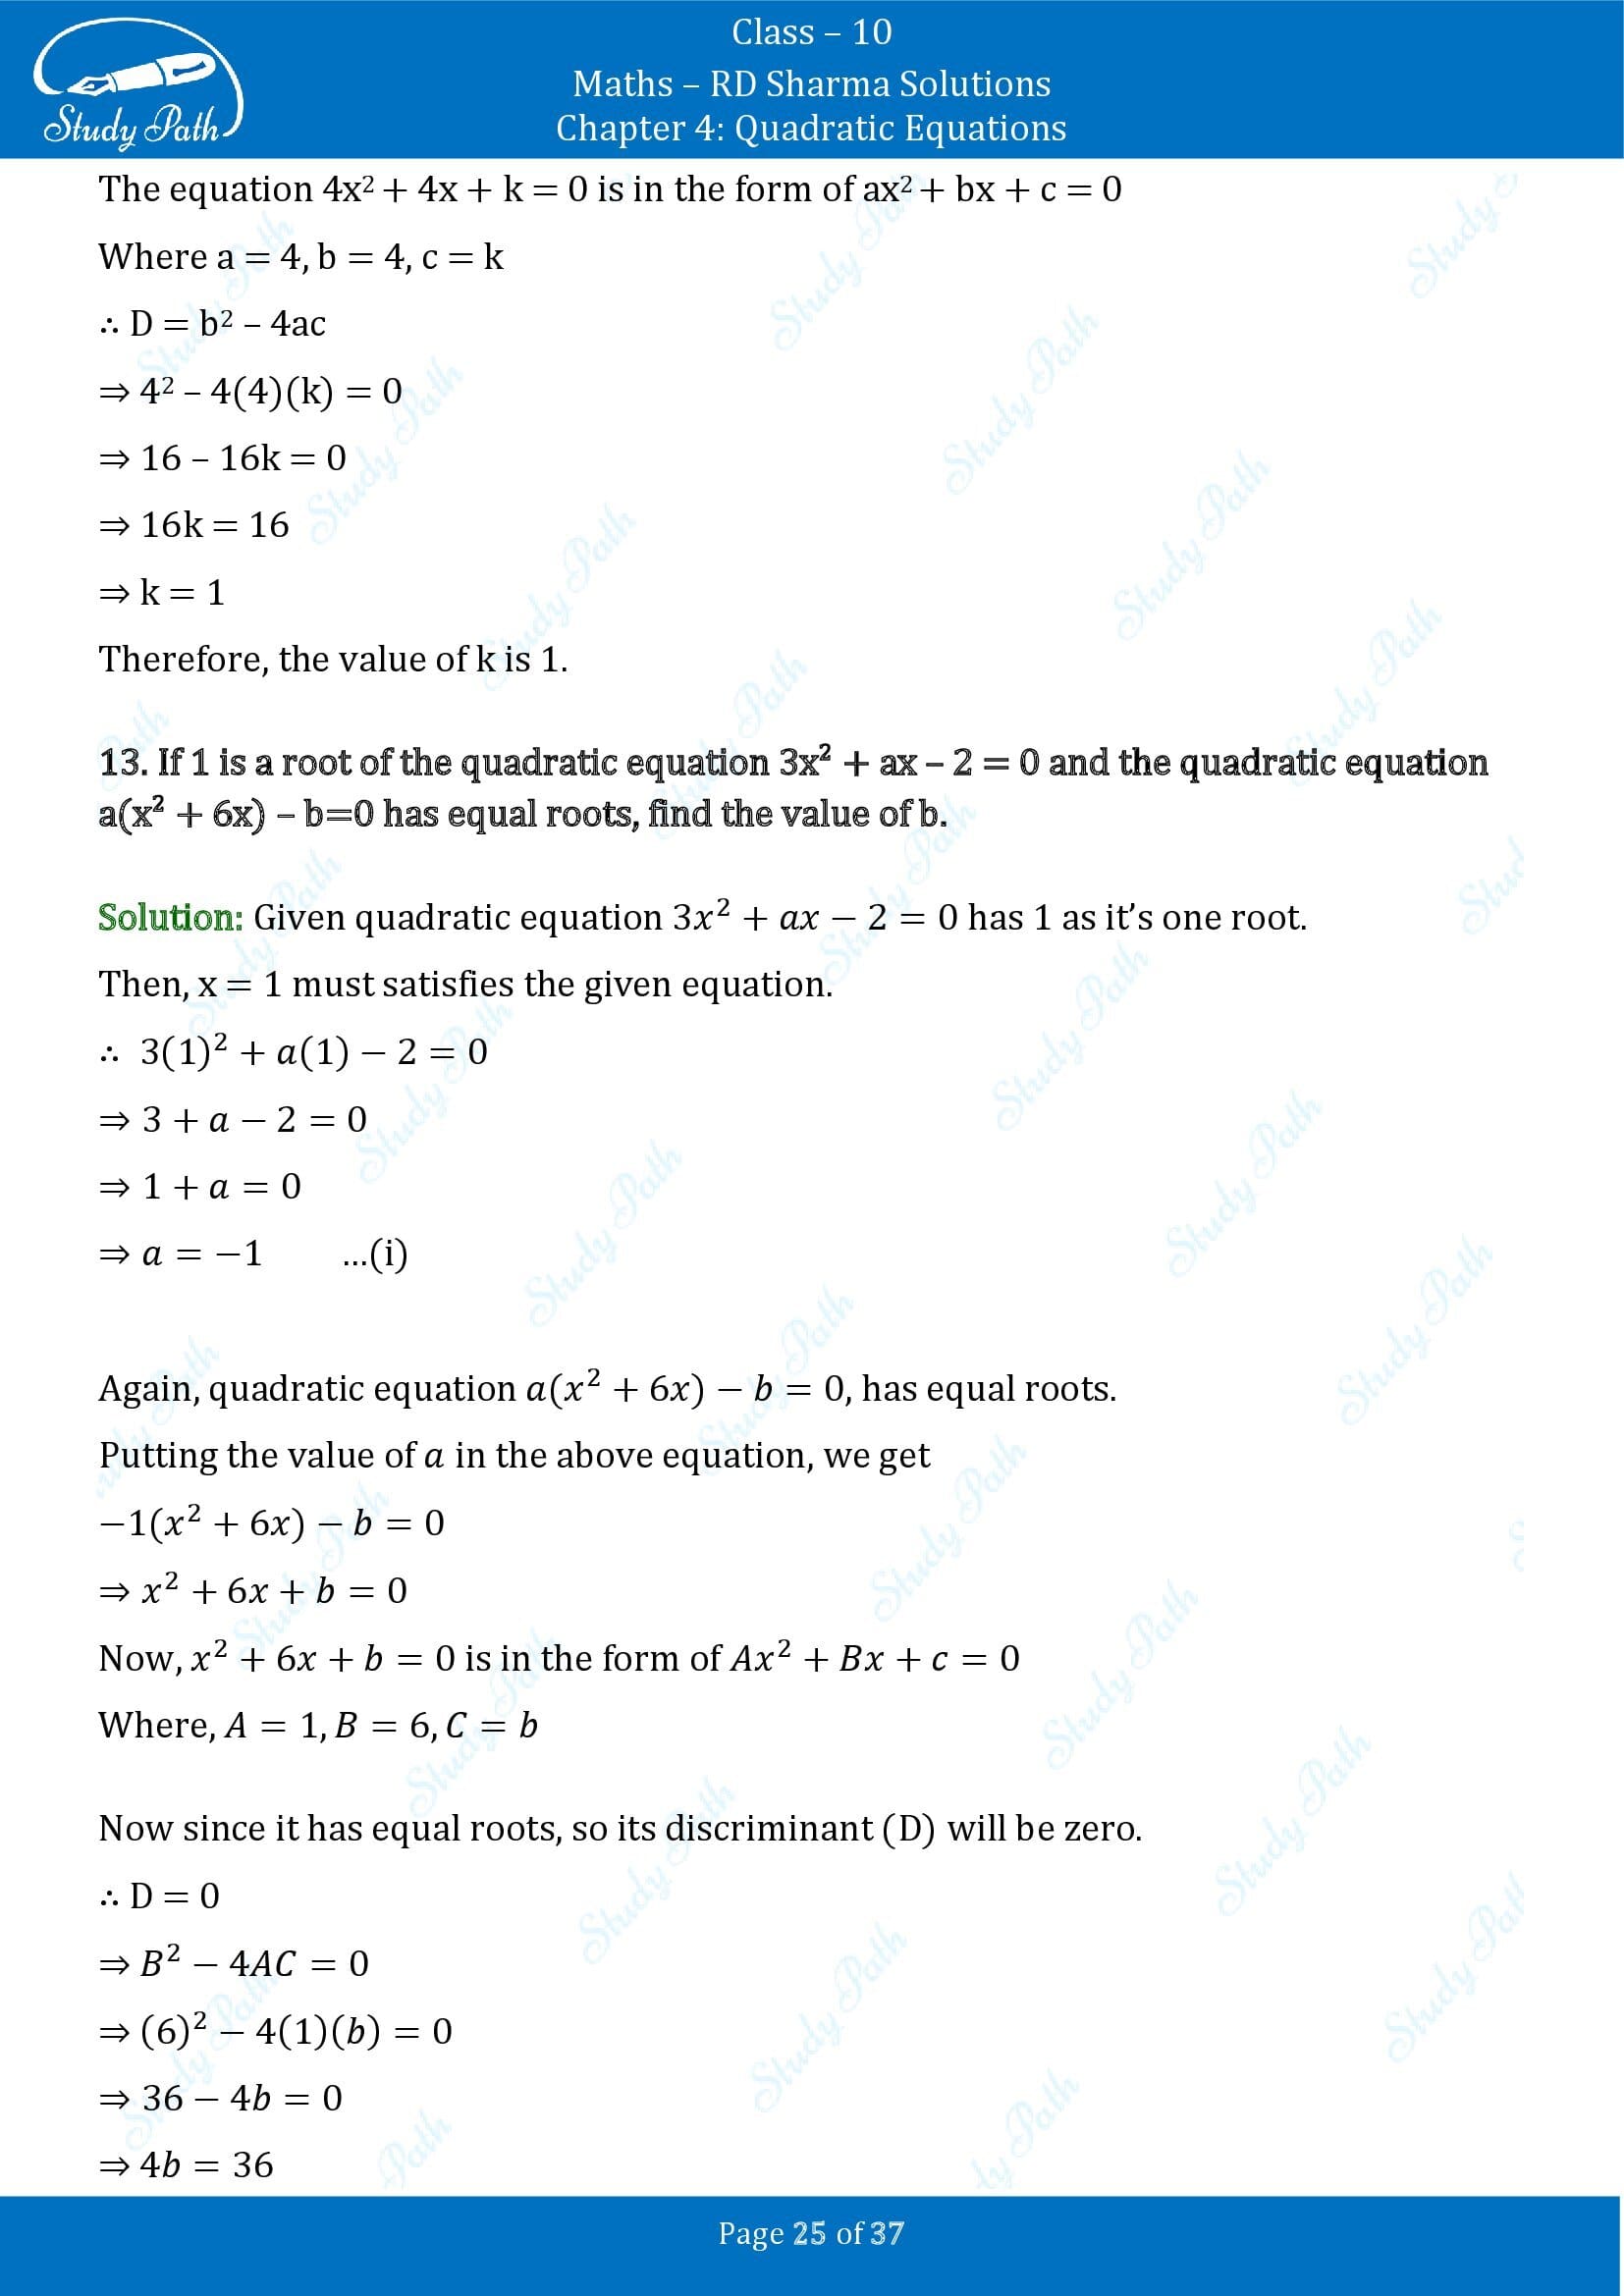 RD Sharma Solutions Class 10 Chapter 4 Quadratic Equations Exercise 4.6 00025